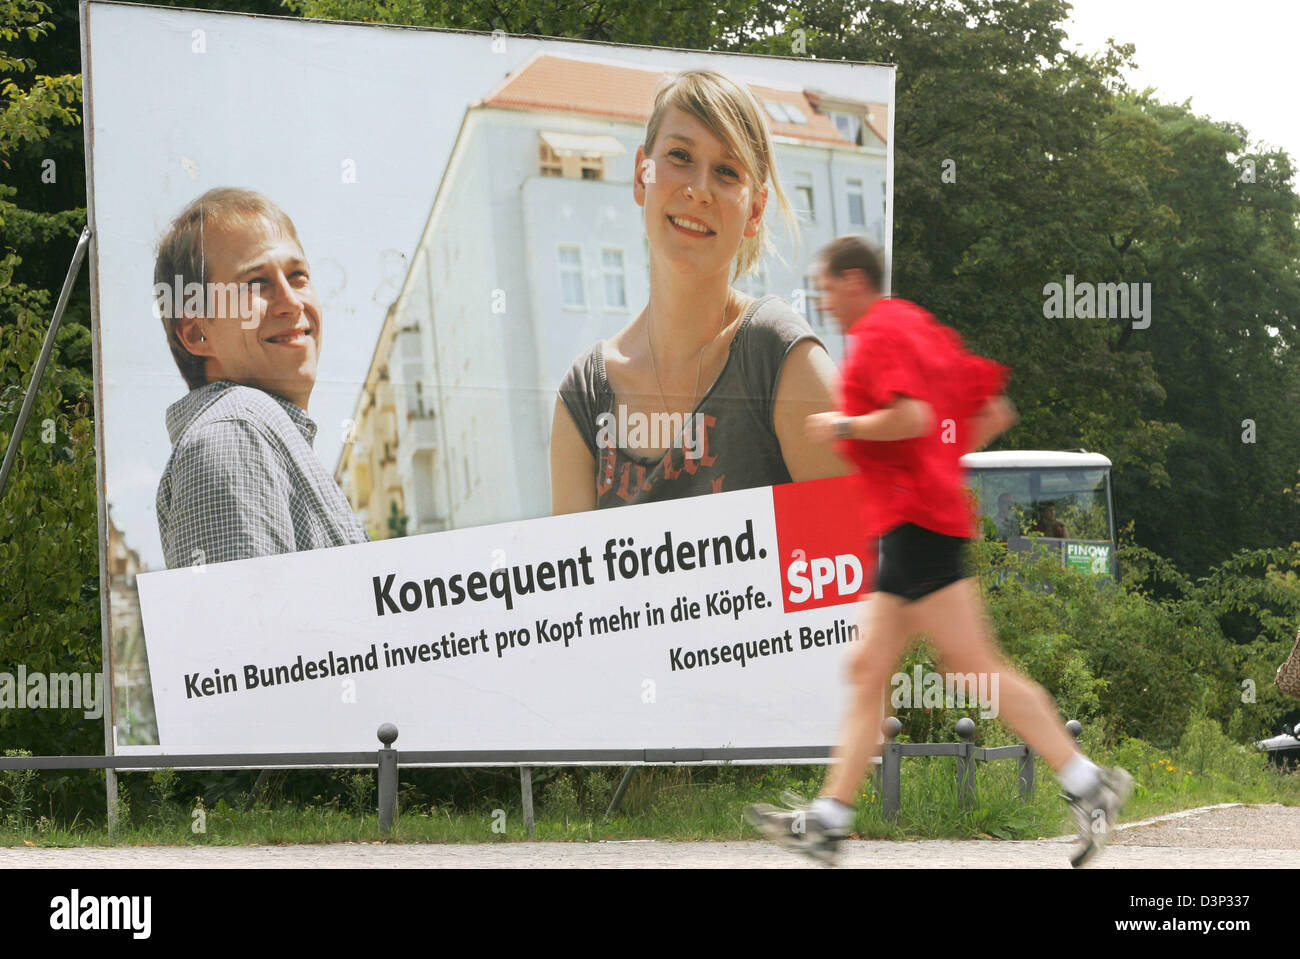 The picture shows an election poster of the Social Democratic Party (SPD) in Berlin, Germany, Wednesday 16 August 2006. Student Daniel Kind (L), displayed on the poster, is said to resemble former soccer national coach Juergen Klinsmann. The poster caused public debates, however, SPD regards the resemblance as a coincidence. Elections for the Berlin House of Representatives will be Stock Photo